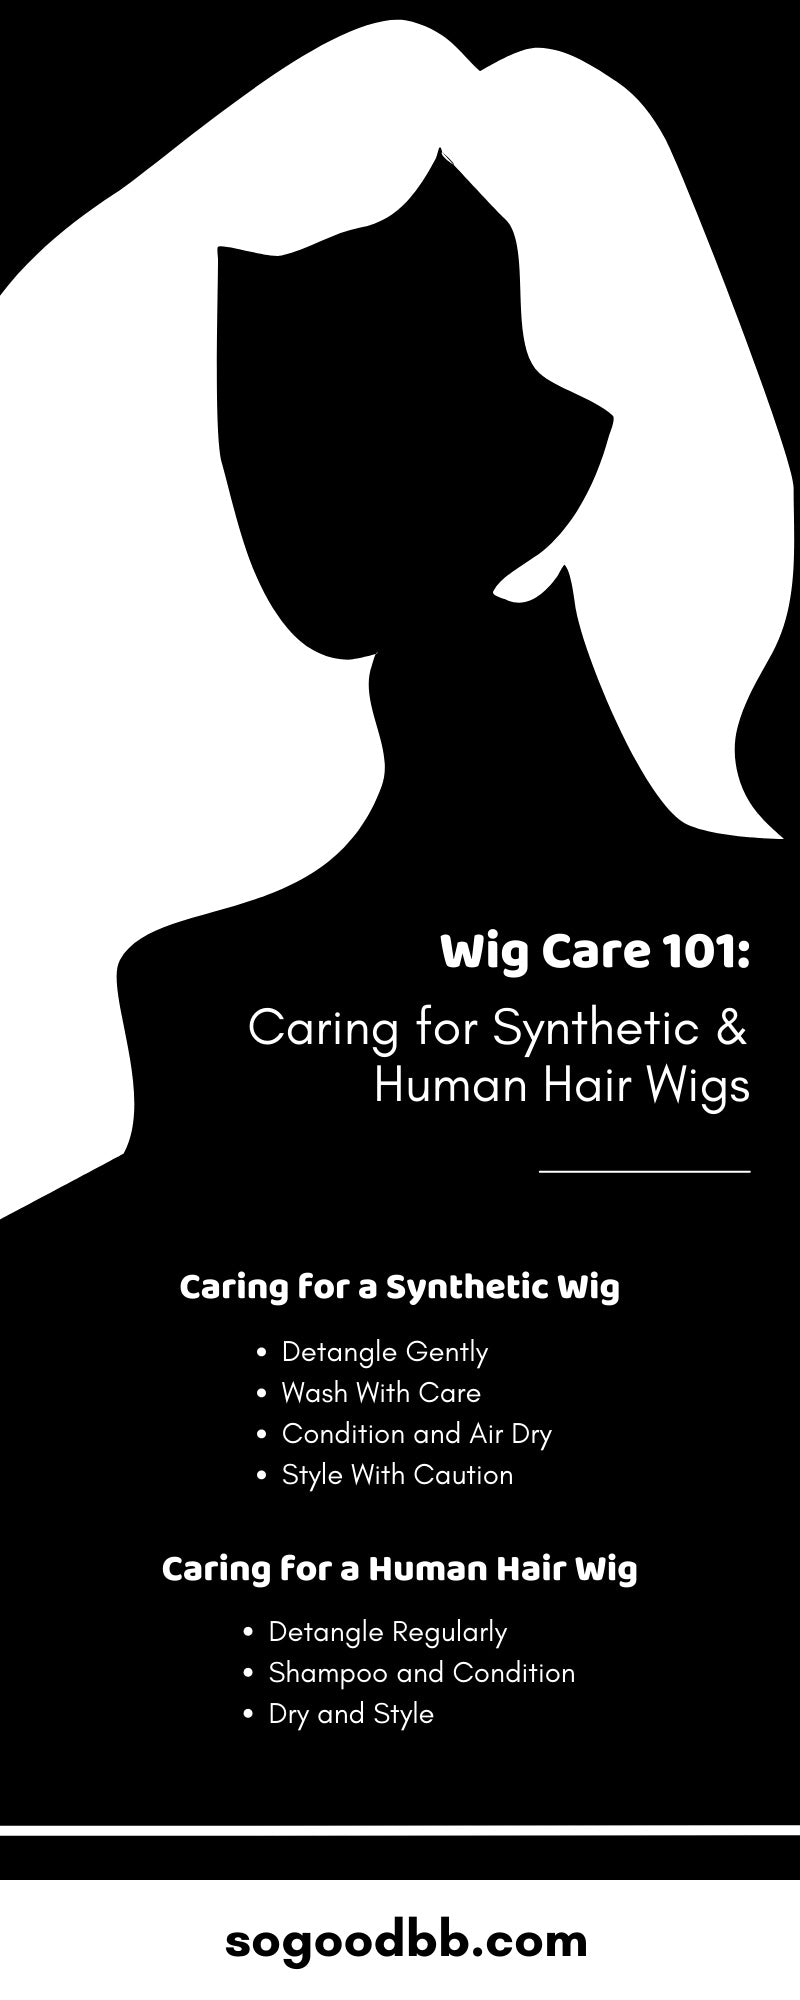 Wig Care 101: Caring for Synthetic & Human Hair Wigs